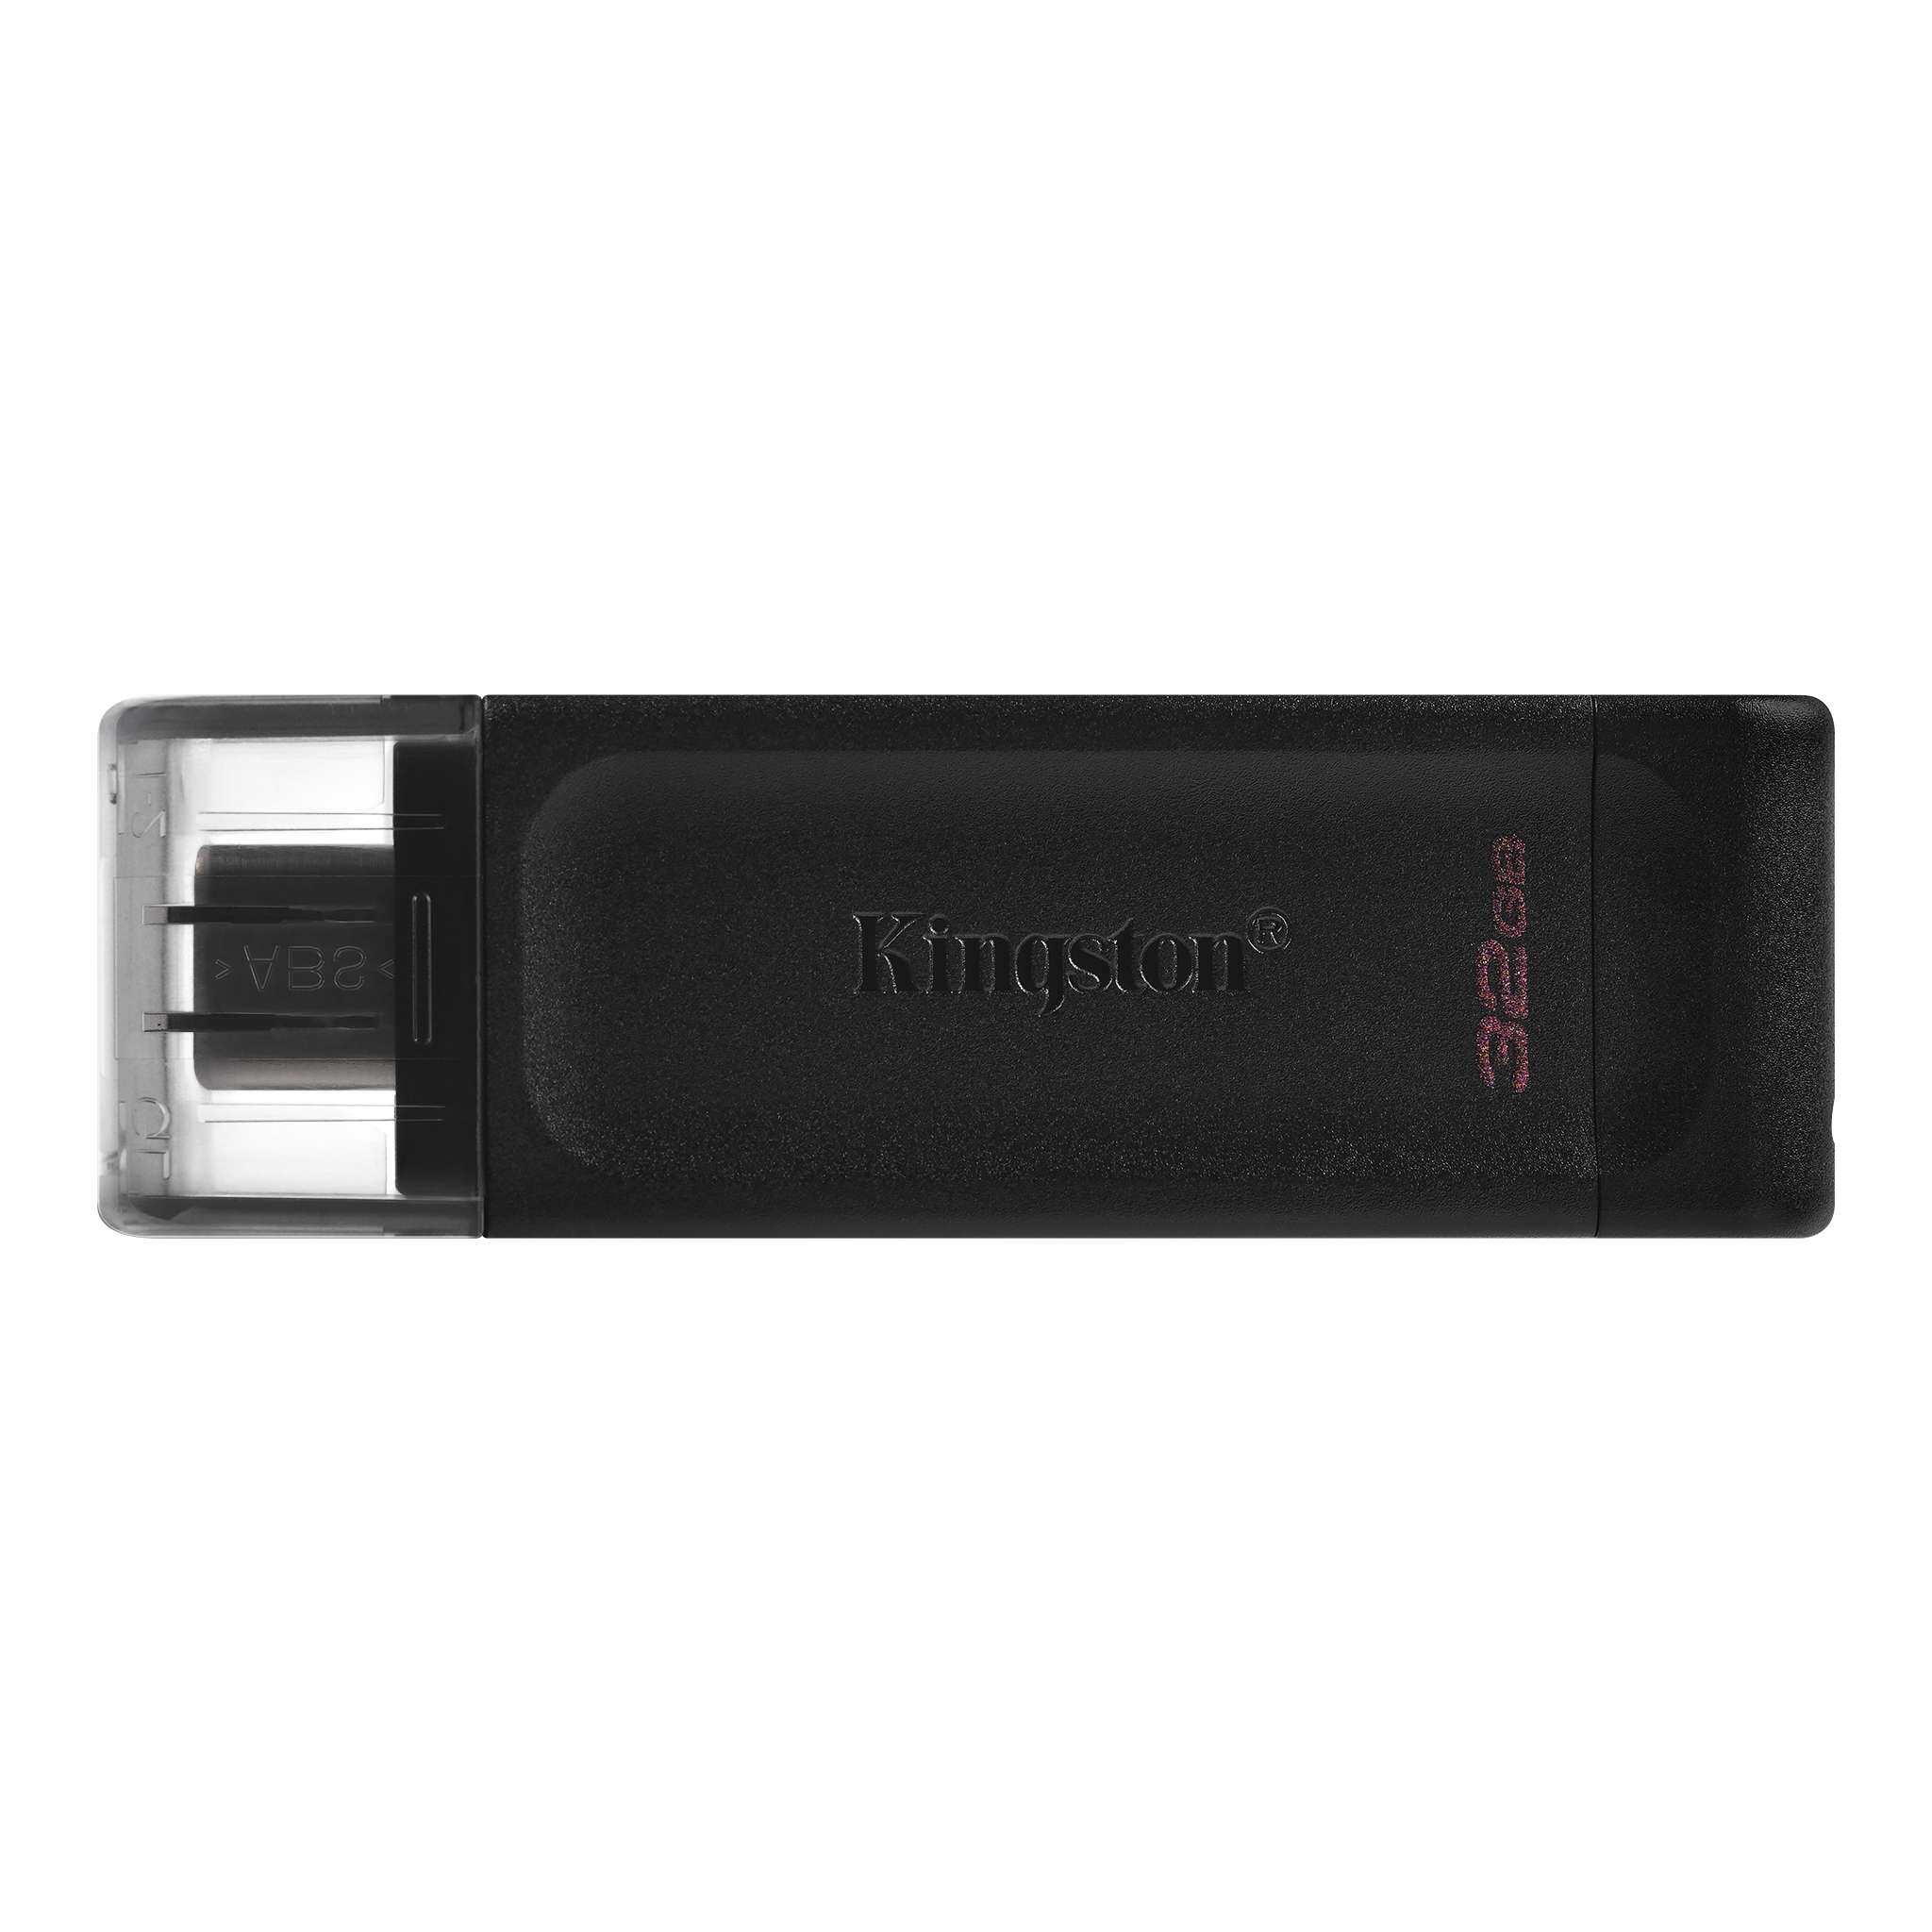 Kingston DataTraveler 70 DT70 Type-C Flash Drive with USB 3.2 Gen 1 Transfer Speed, Portable and Lightweight Design, Perfect for Type-C Device, Plug and Play (32GB / 64GB / 128GB)